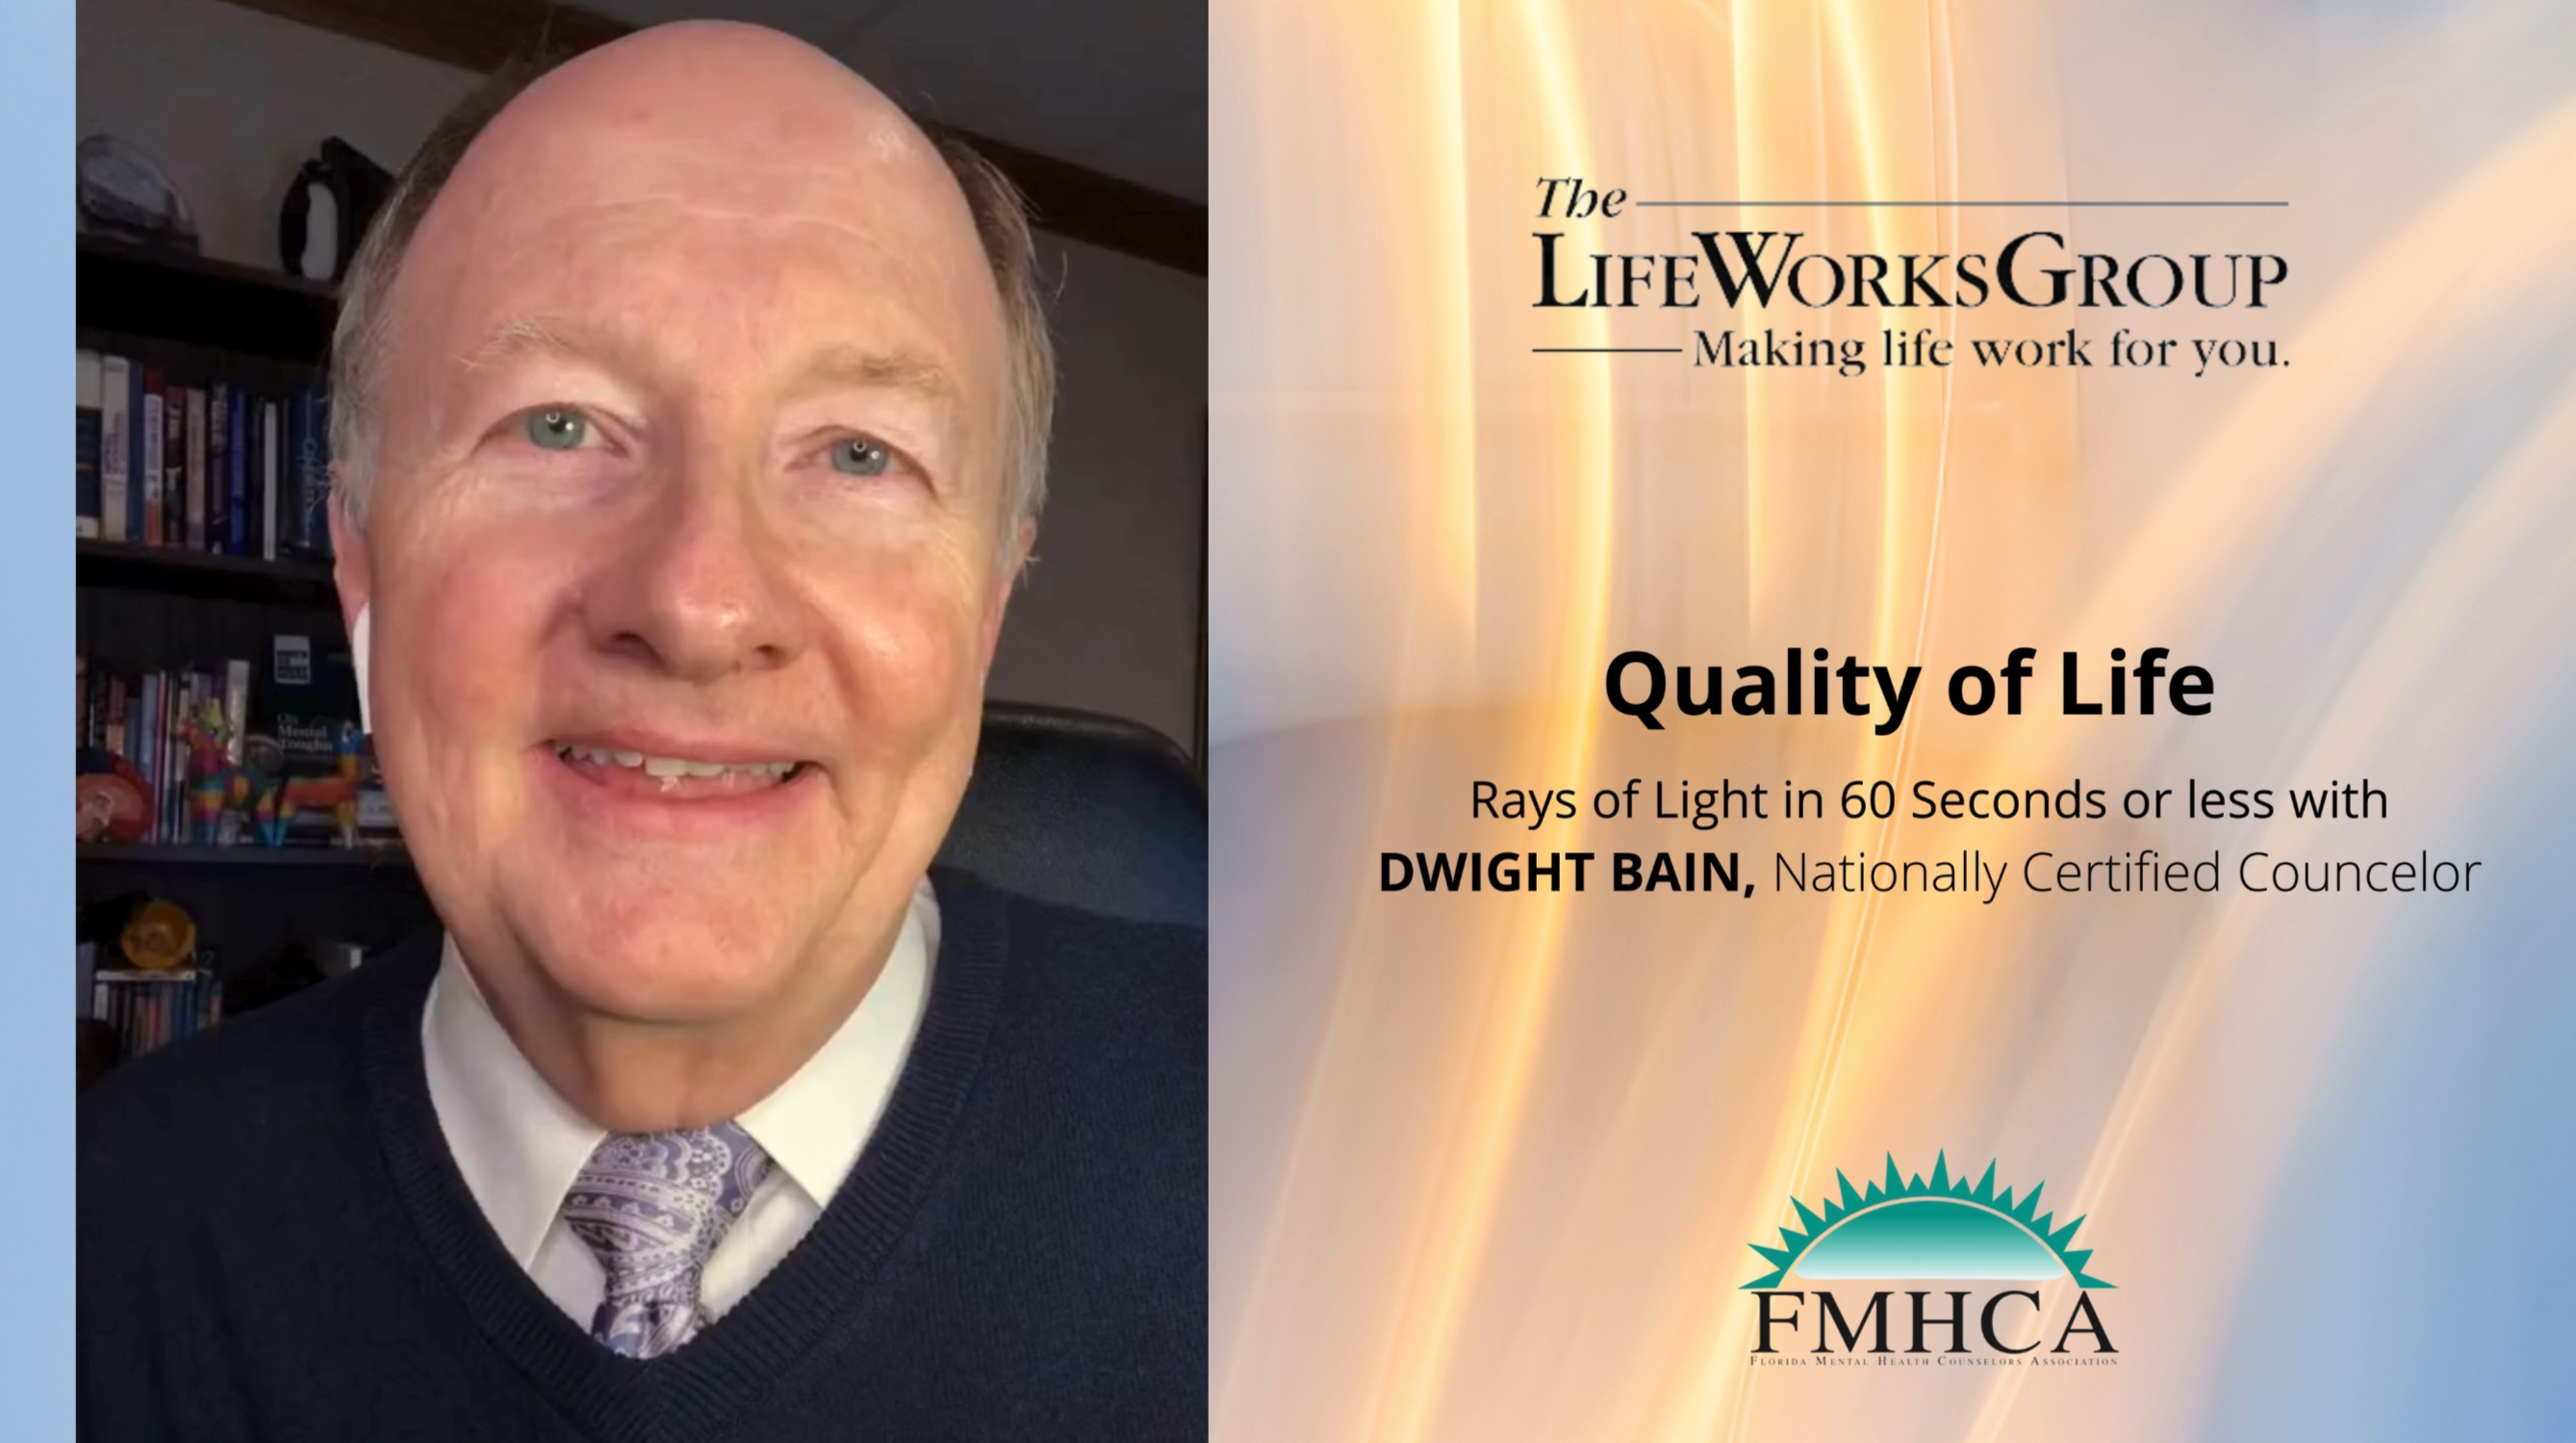 Ray of Light: Quality of Life